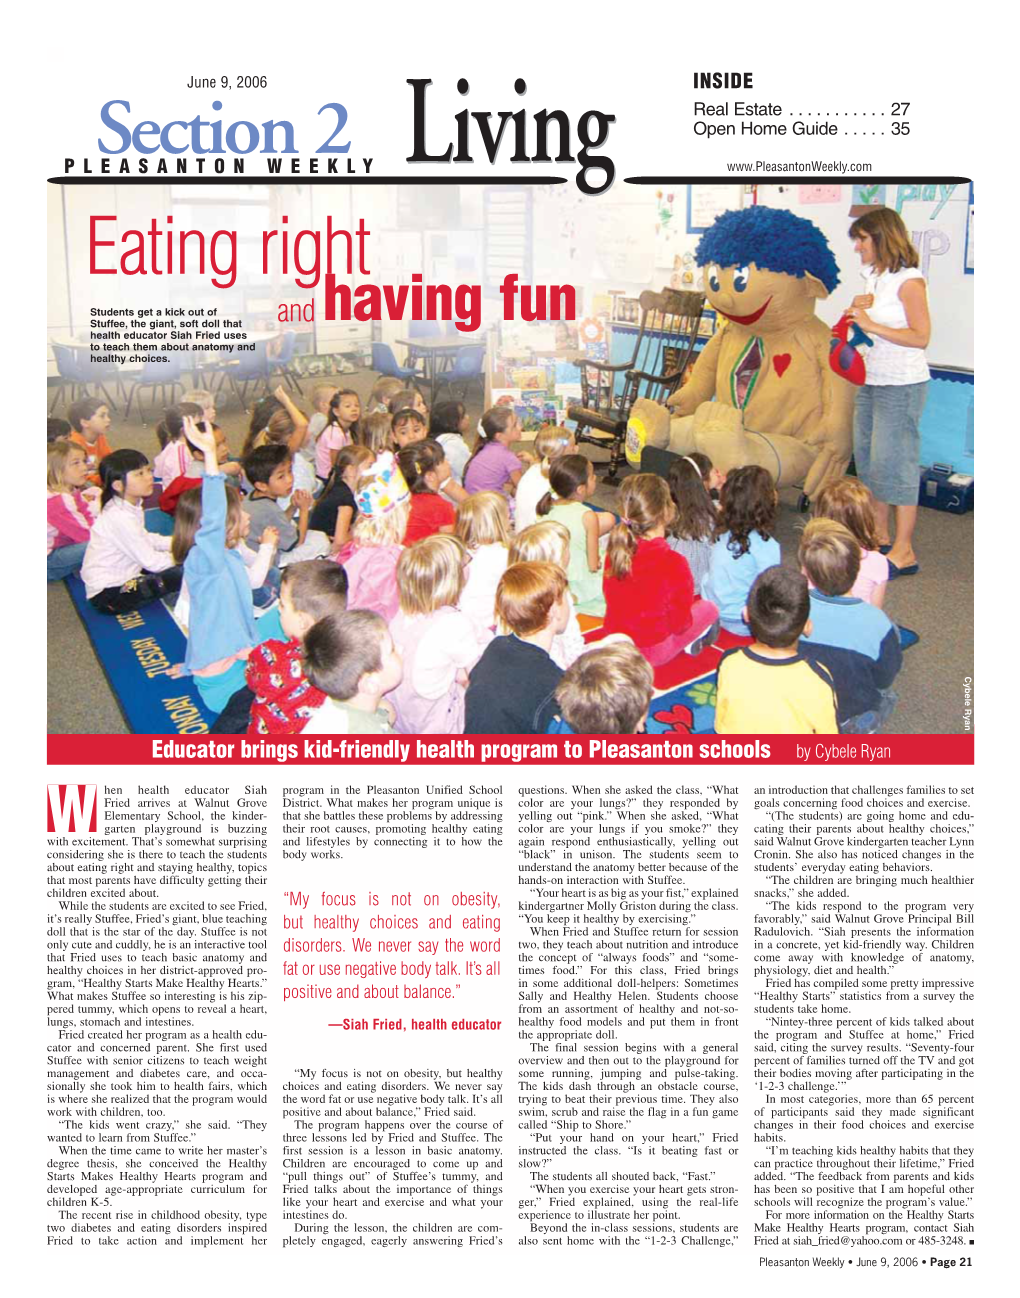 Section 2 PLEASANTON WEEKLY Livingliving Eating Right